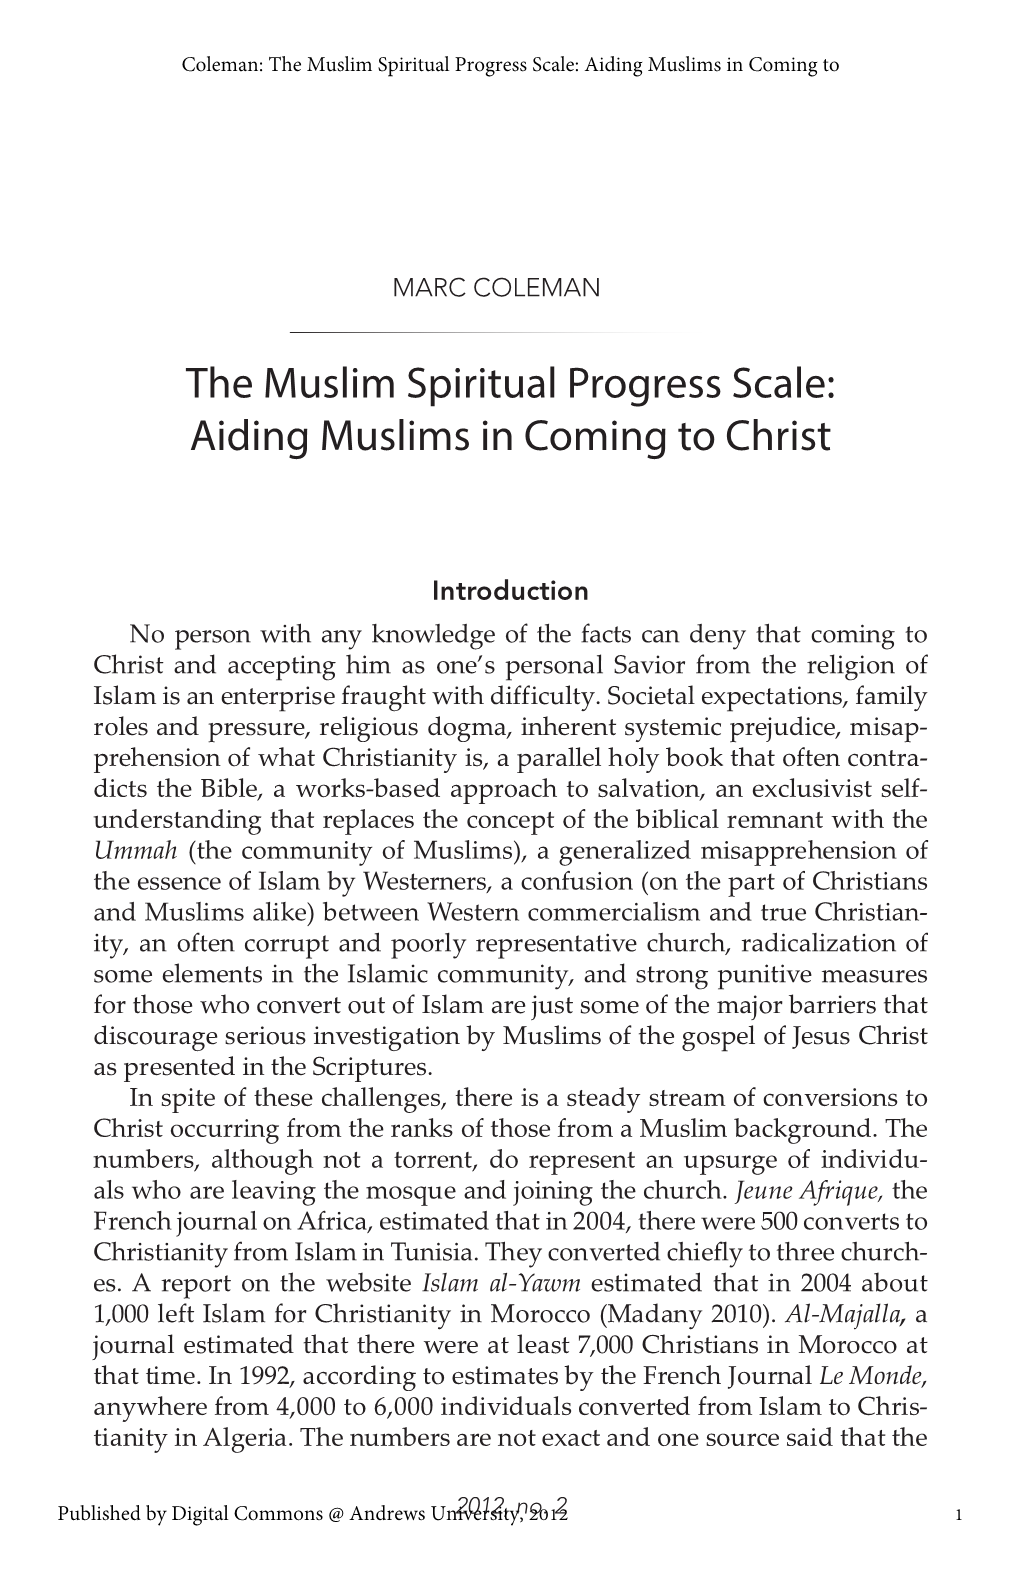 Aiding Muslims in Coming to Christ